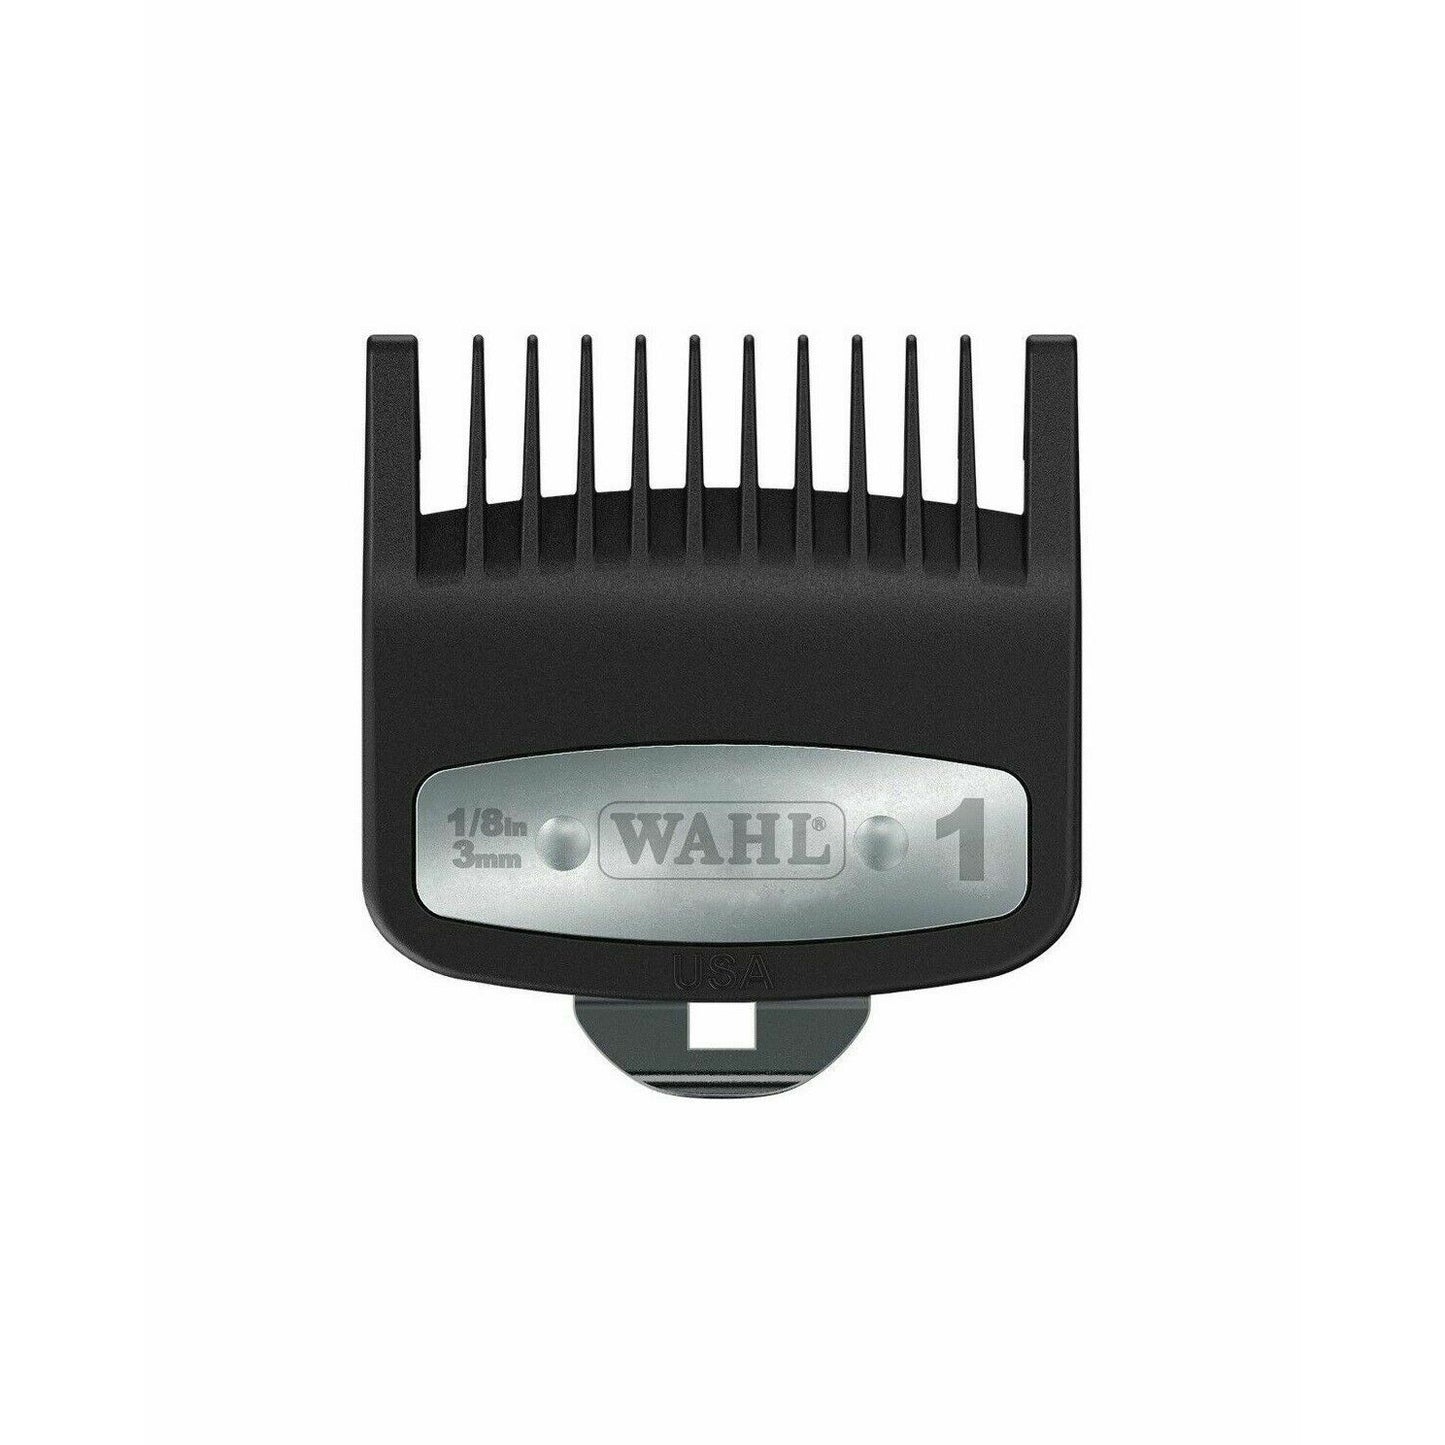 WAHL 3354-1300 #1 Premium Cutting Guide With Metal Clip 1/8" 3.0MM